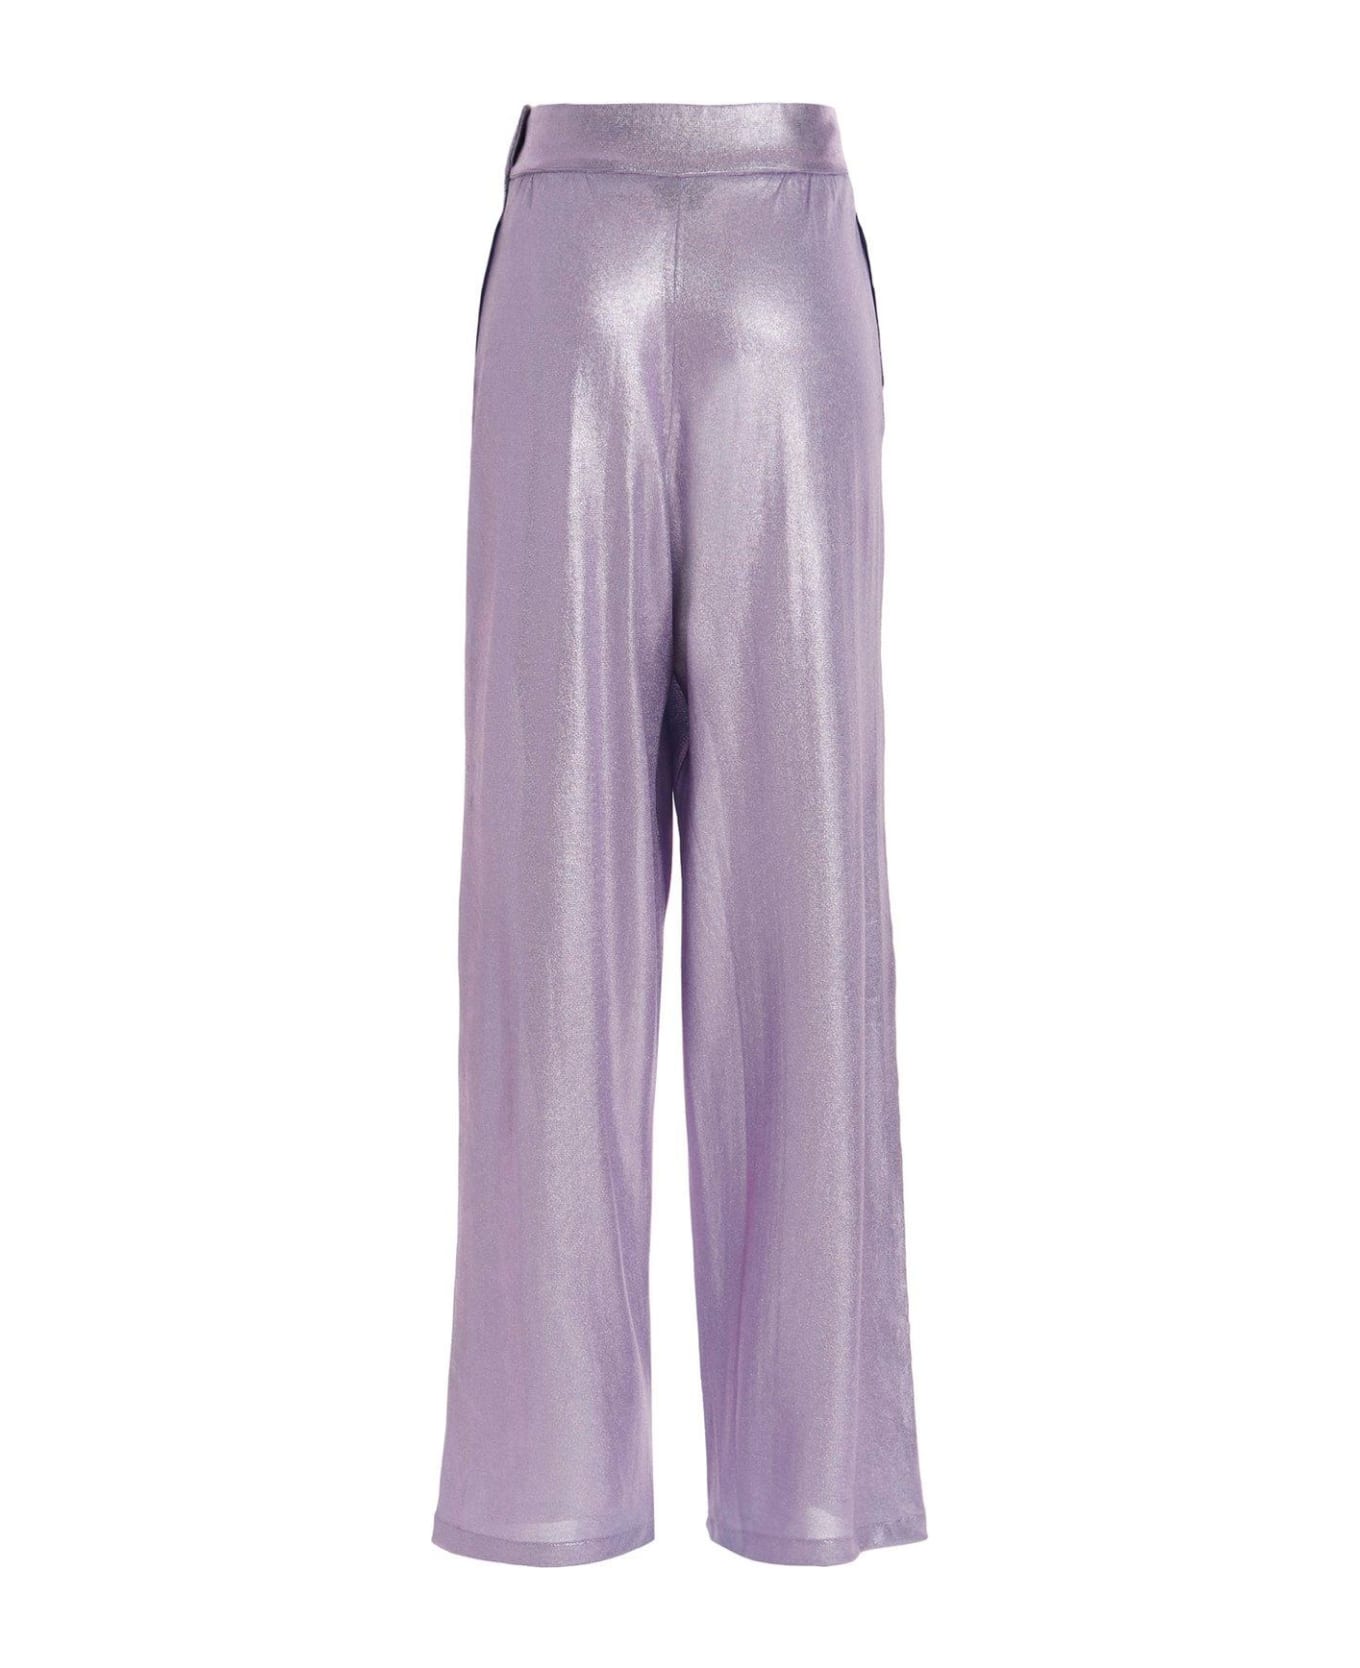 Tom Ford High-rise Metallic Effect Trousers - LILAC